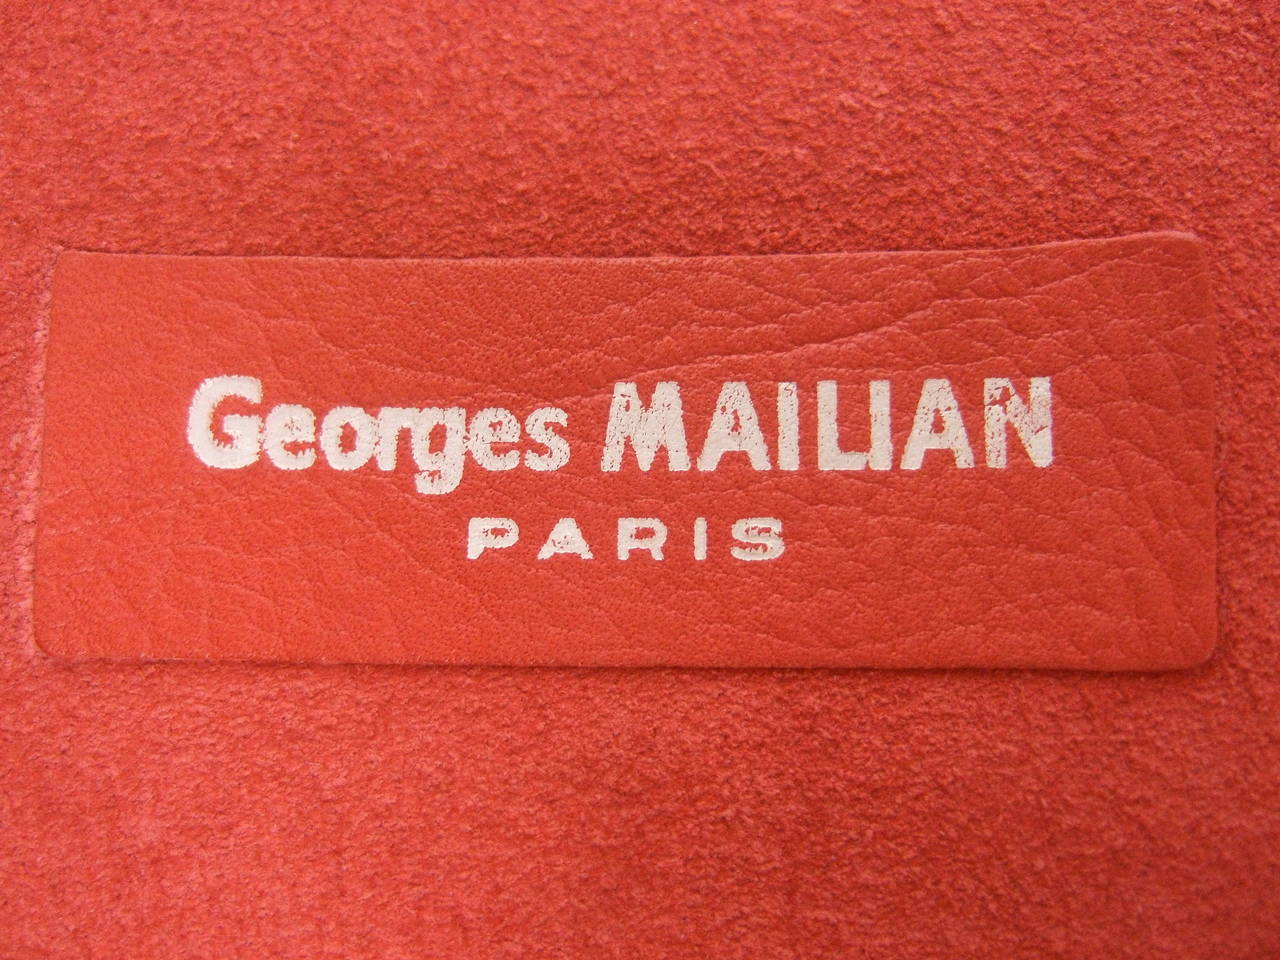 Surrealistic Scarlet Red Leather Brass Claw Belt by Georges Mailian Paris For Sale 2